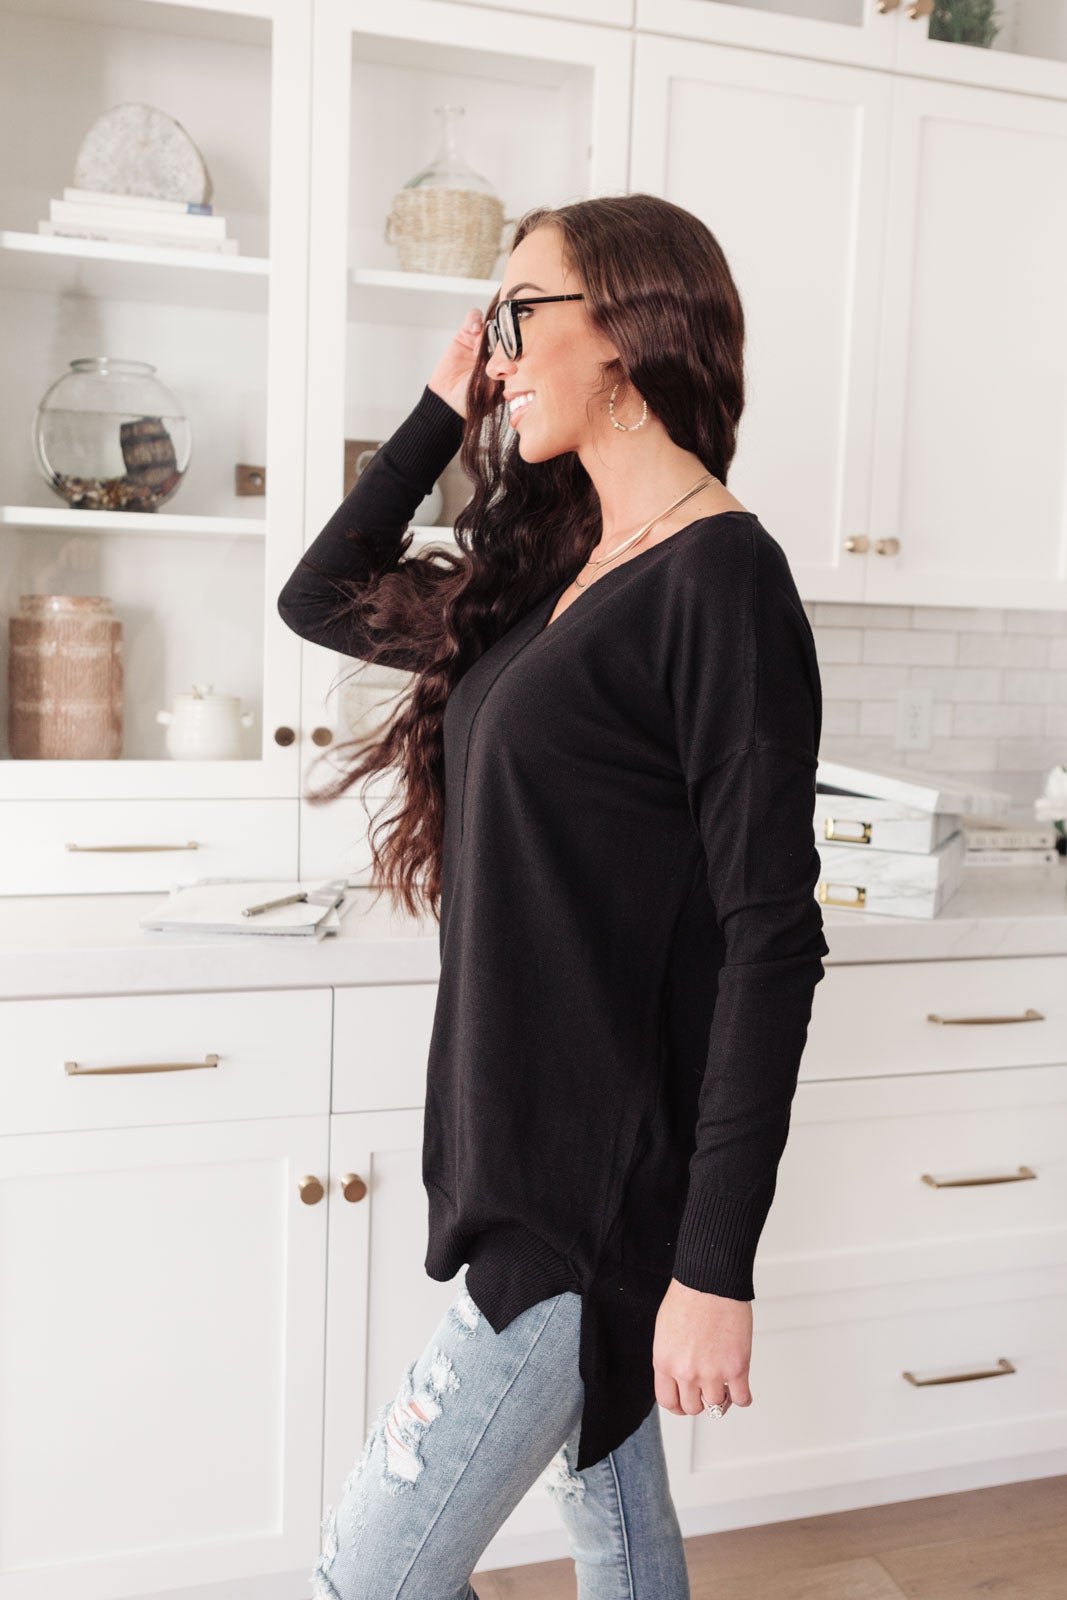 Red Carpet Tunic Top In Black (Online Exclusive)